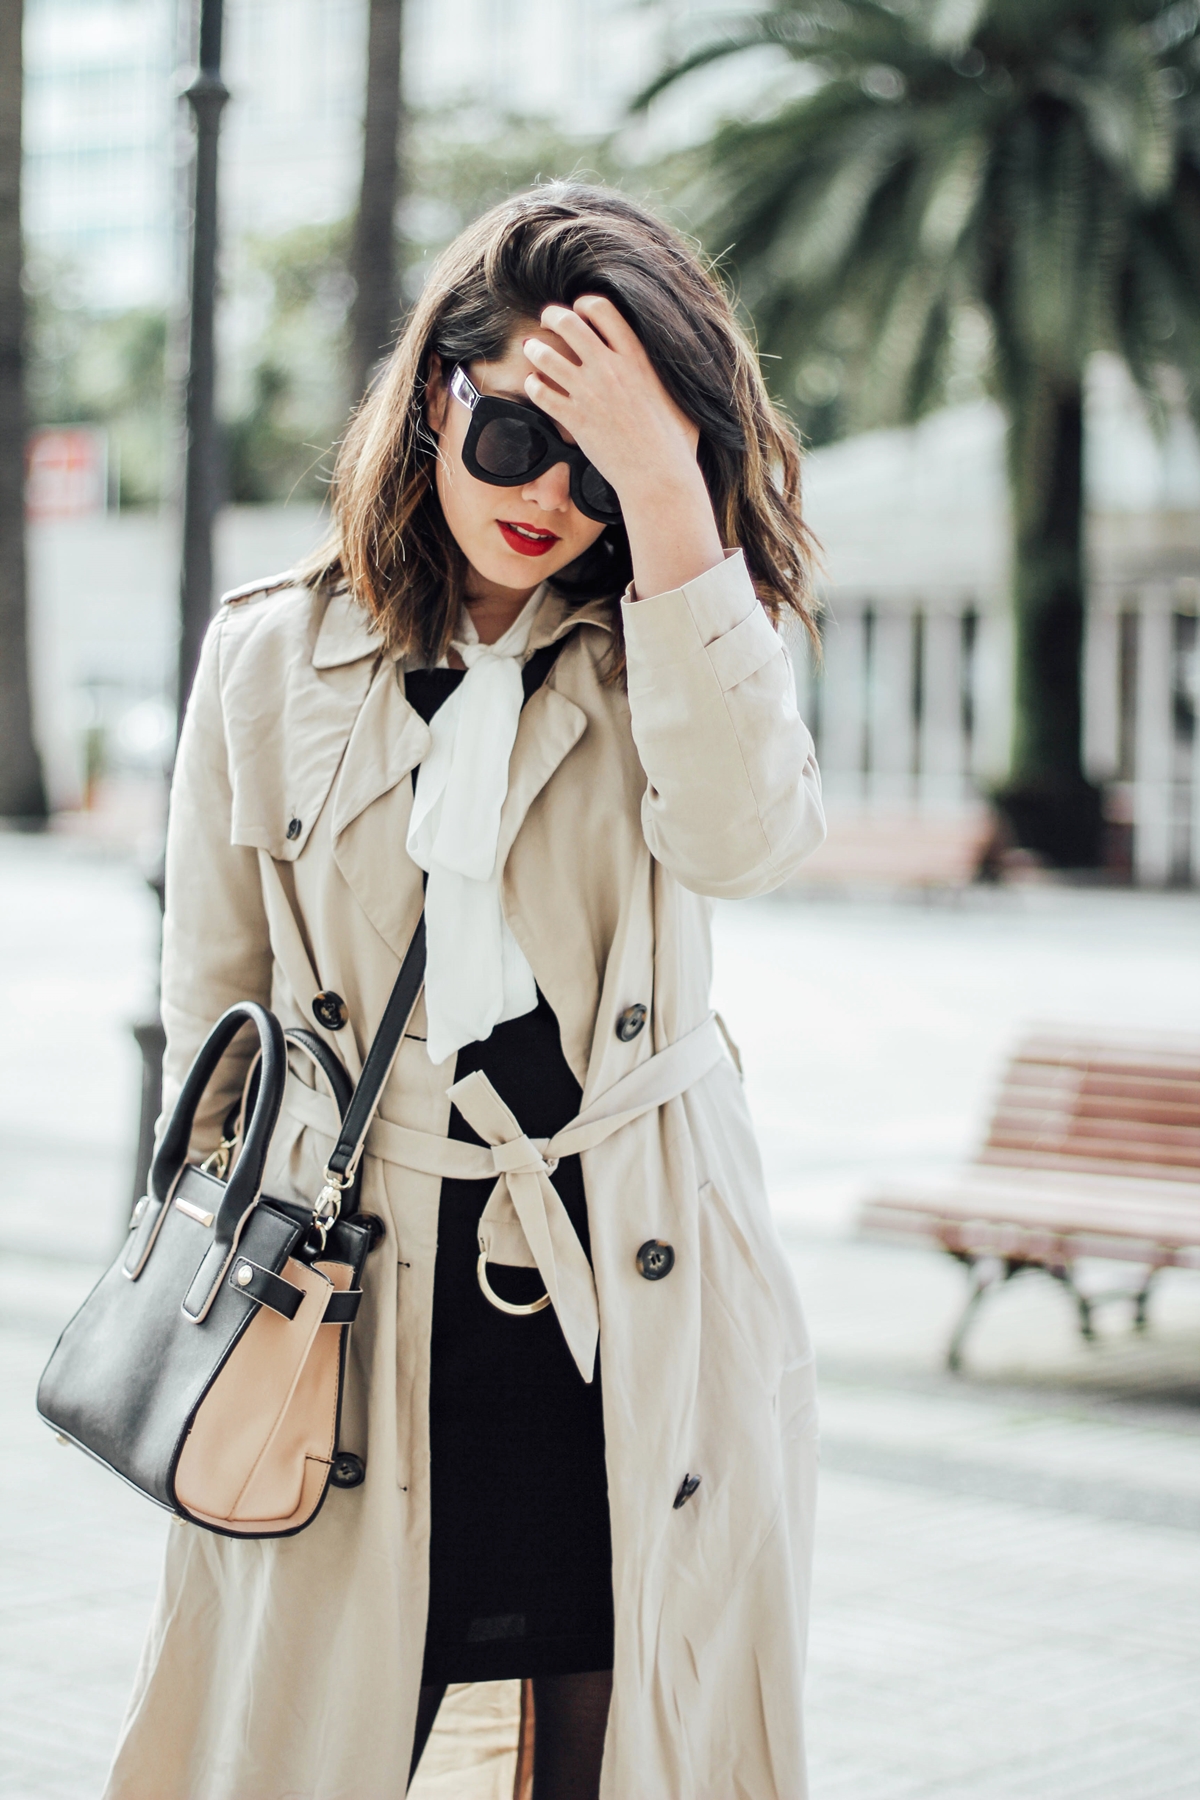 styleheroes-dorothy-perkins-pinafore-dress-trench-baby-marta-celine-sunglasses-streetstyle-march